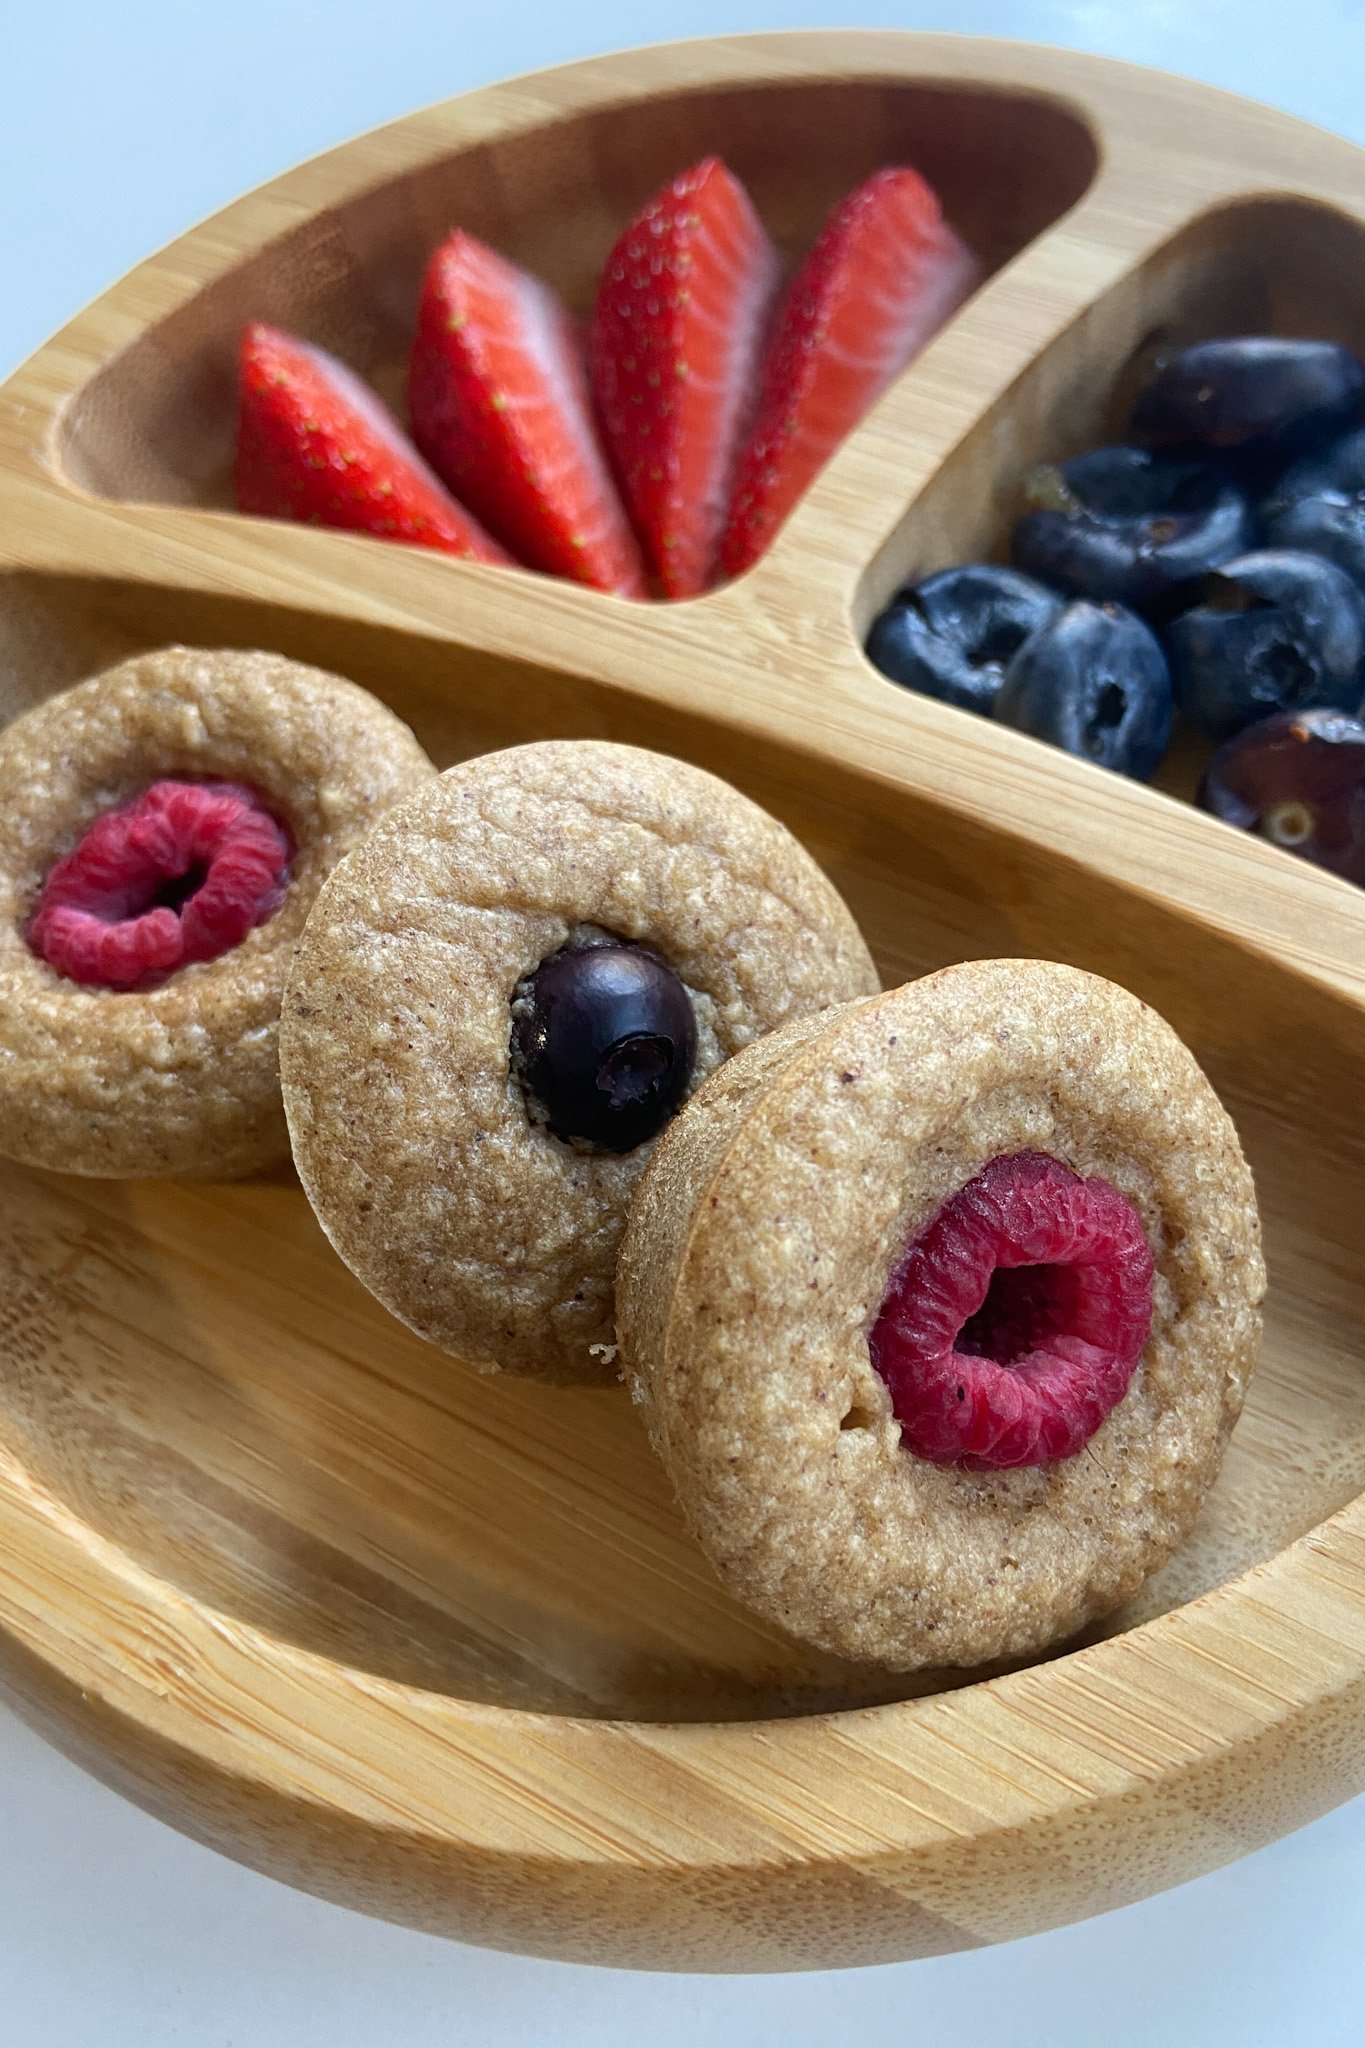 Peanut butter and jelly muffins served with berries.